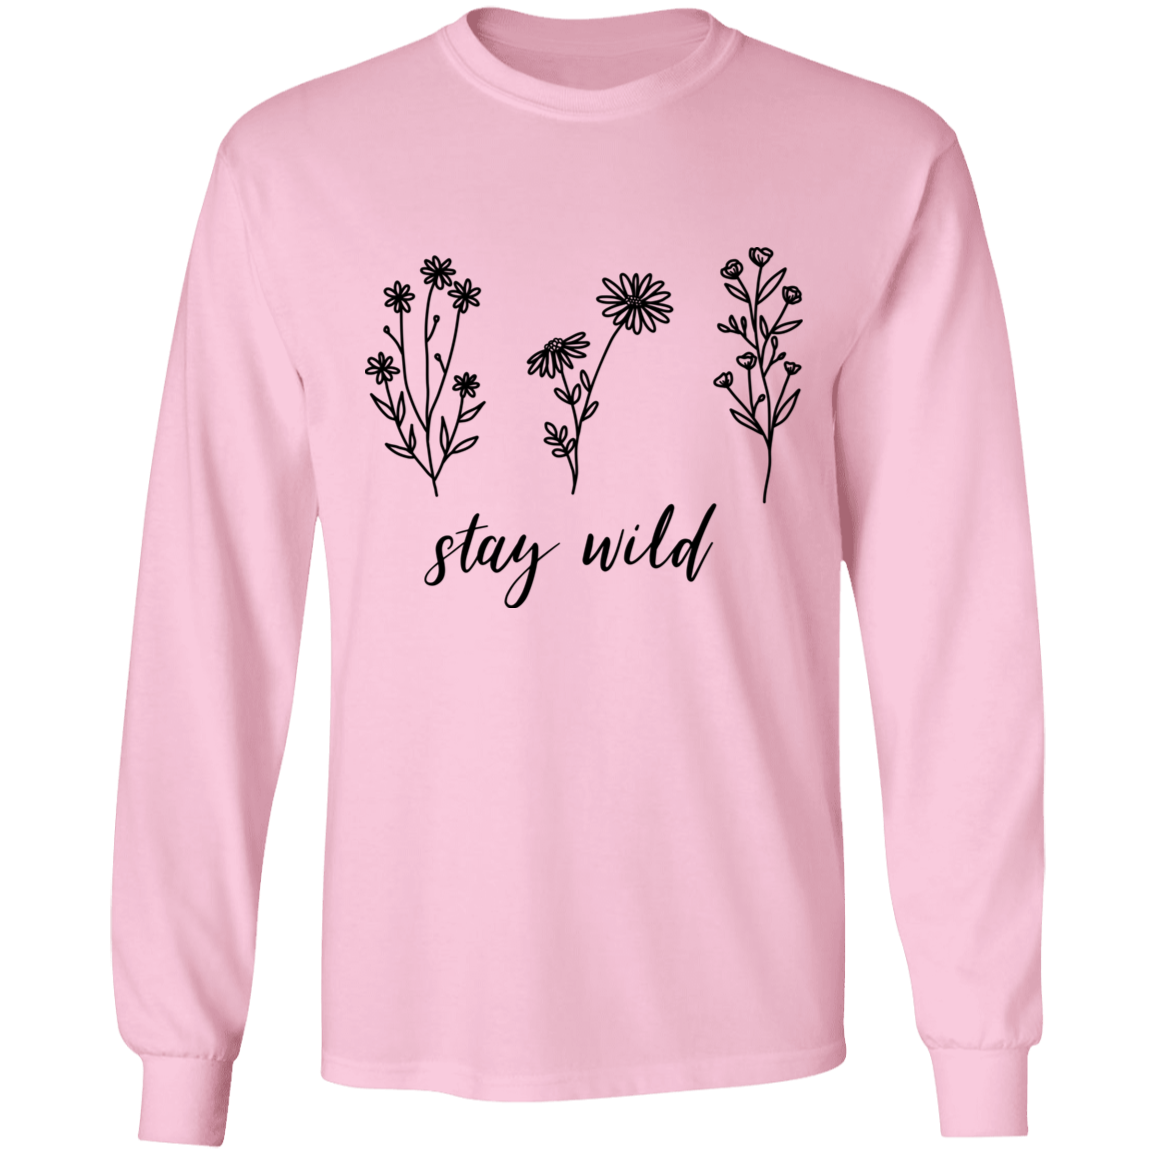 Stay Wild Cotton T-Shirt Long sleeve